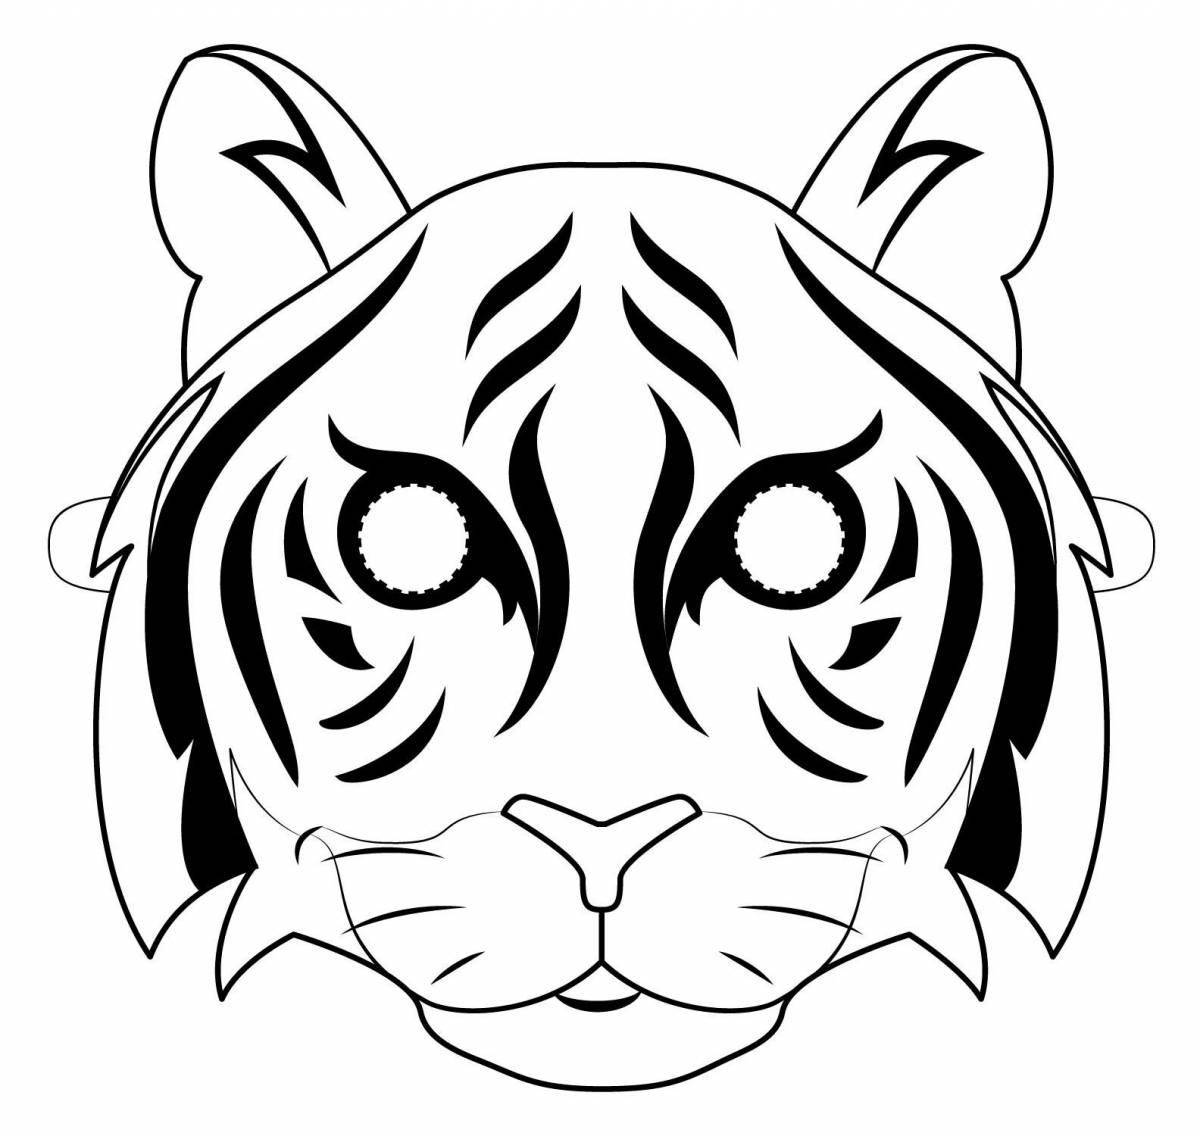 Great tiger mask coloring book